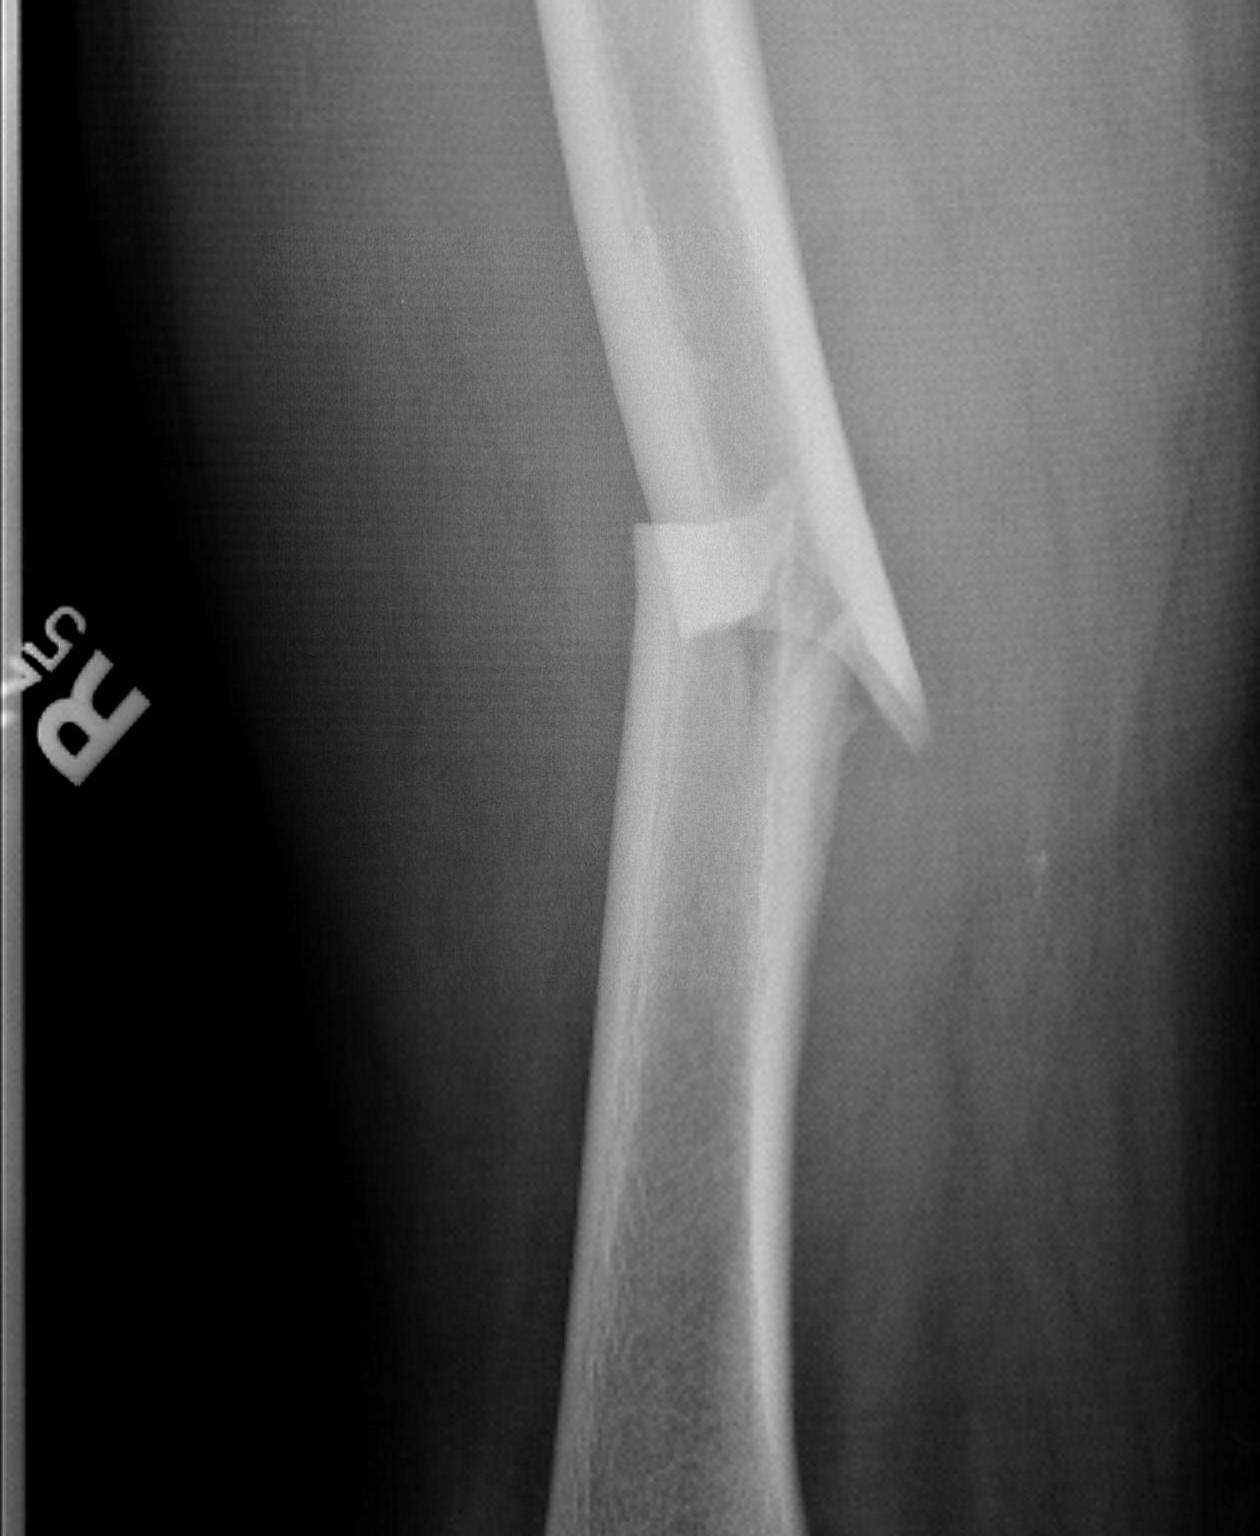 Femoral Shaft Fracture No comminution